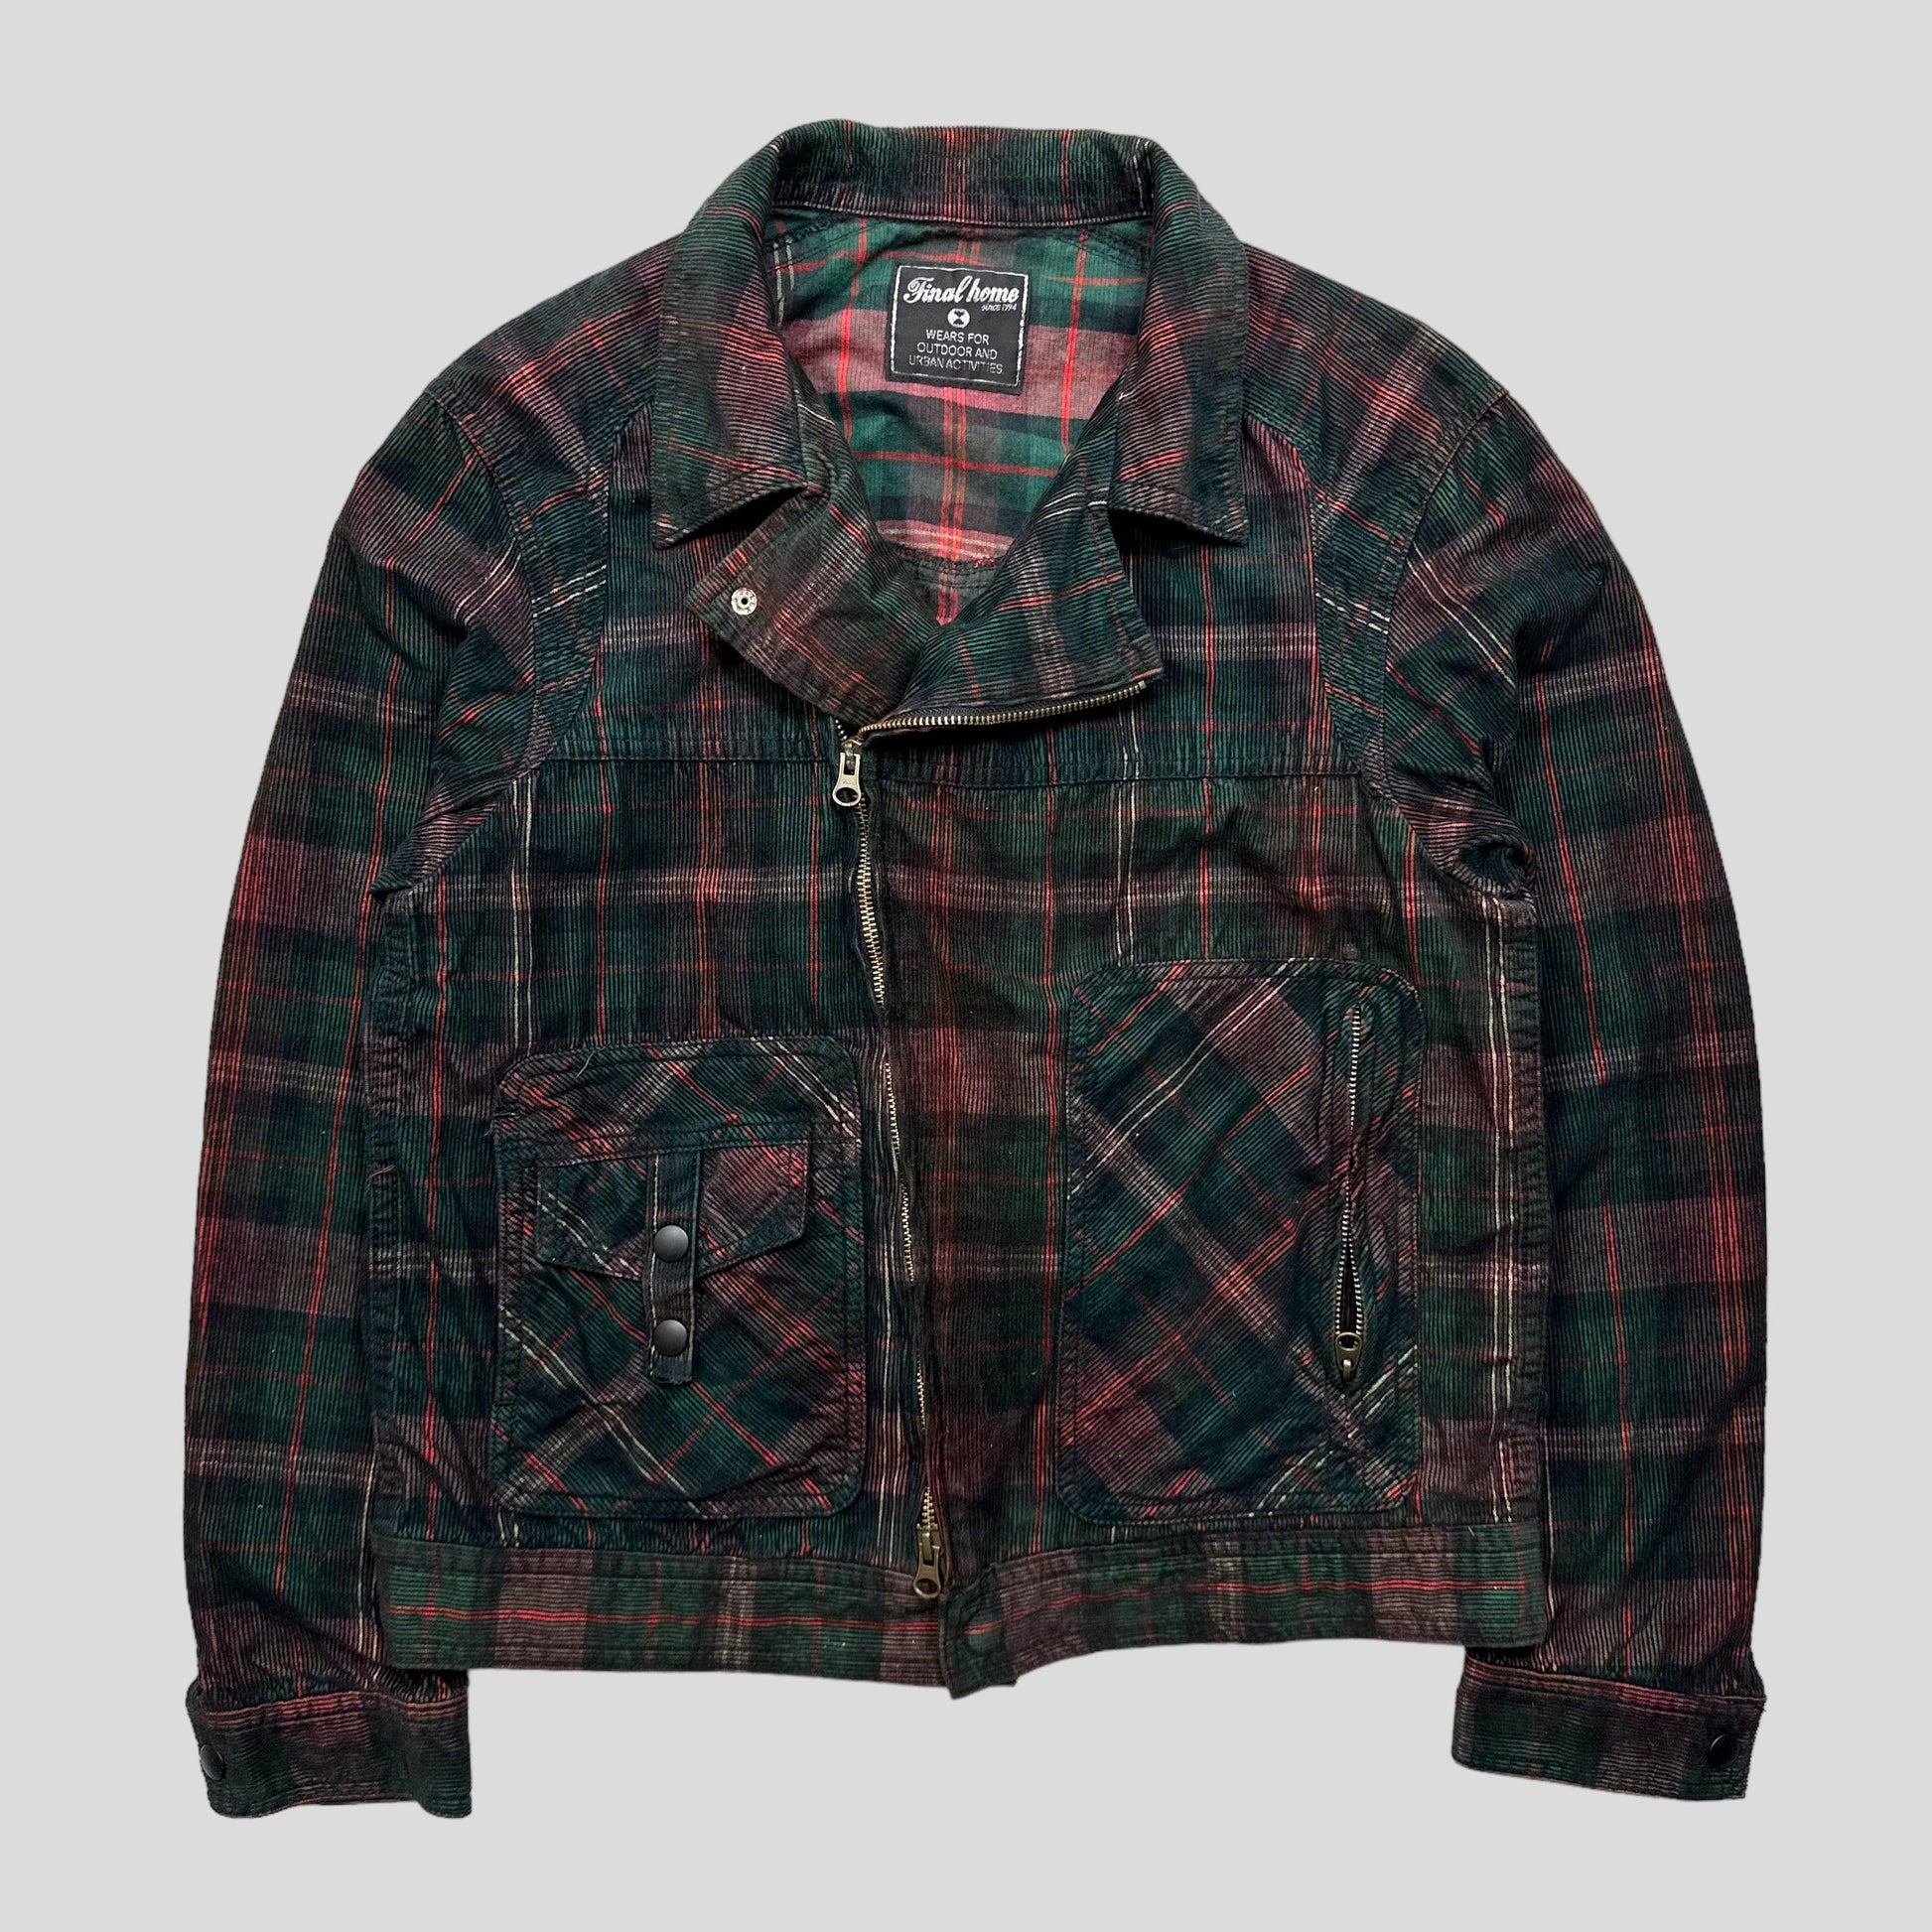 Final Home Corduroy Plaid Cropped Jacket - M (S) - Known Source